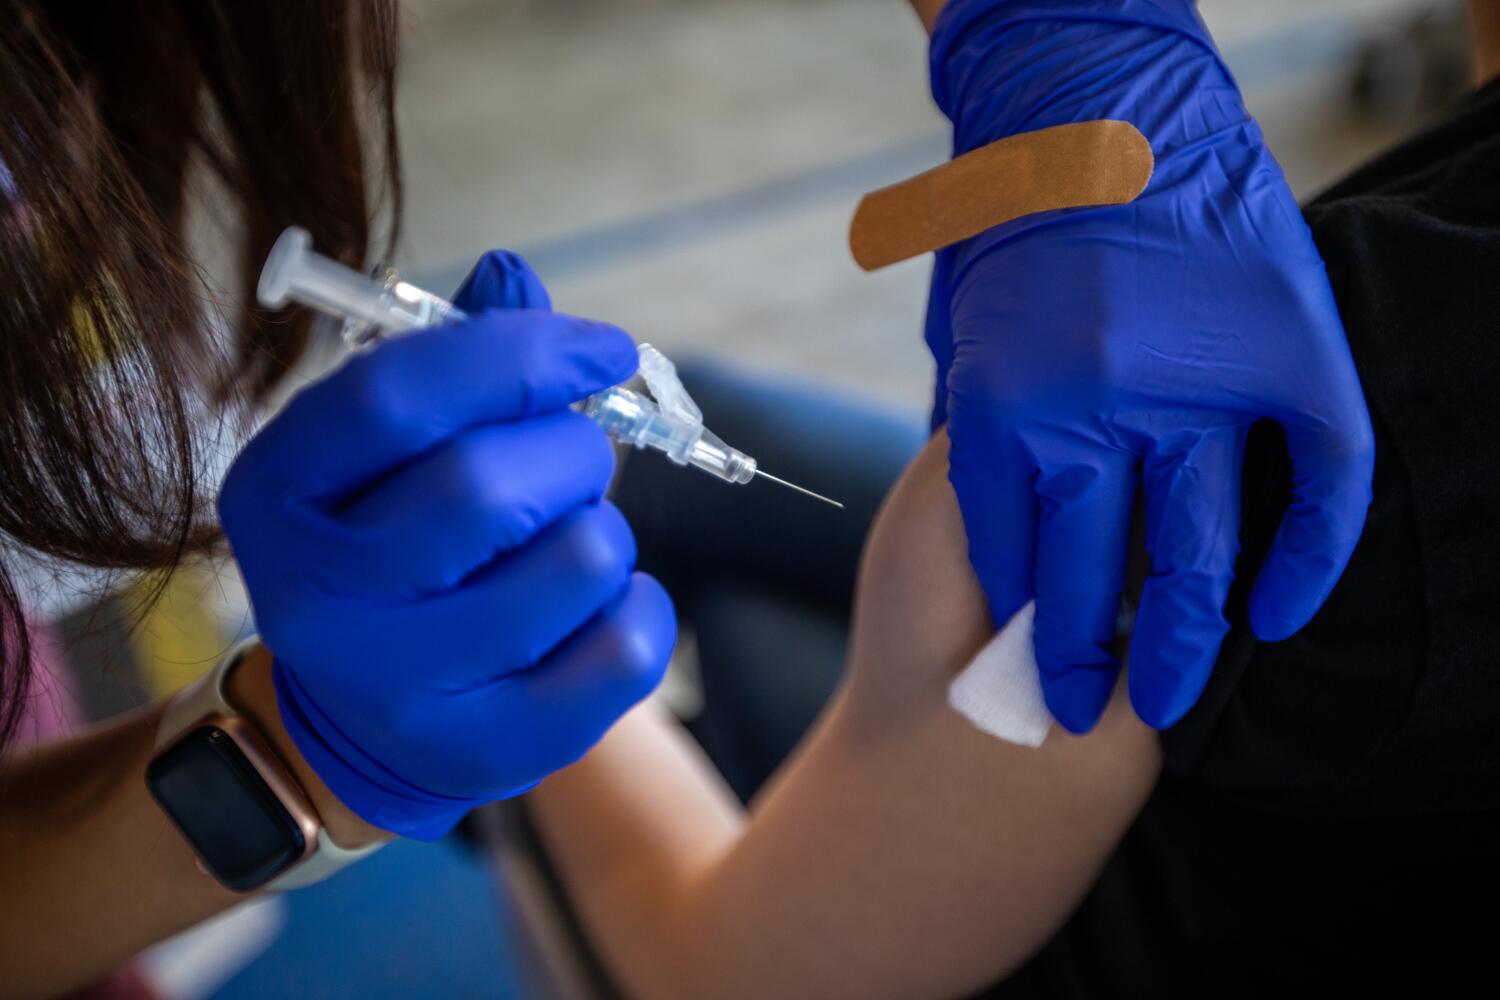 L.A. County reports first flu death of season, renews call for residents to get vaccinated